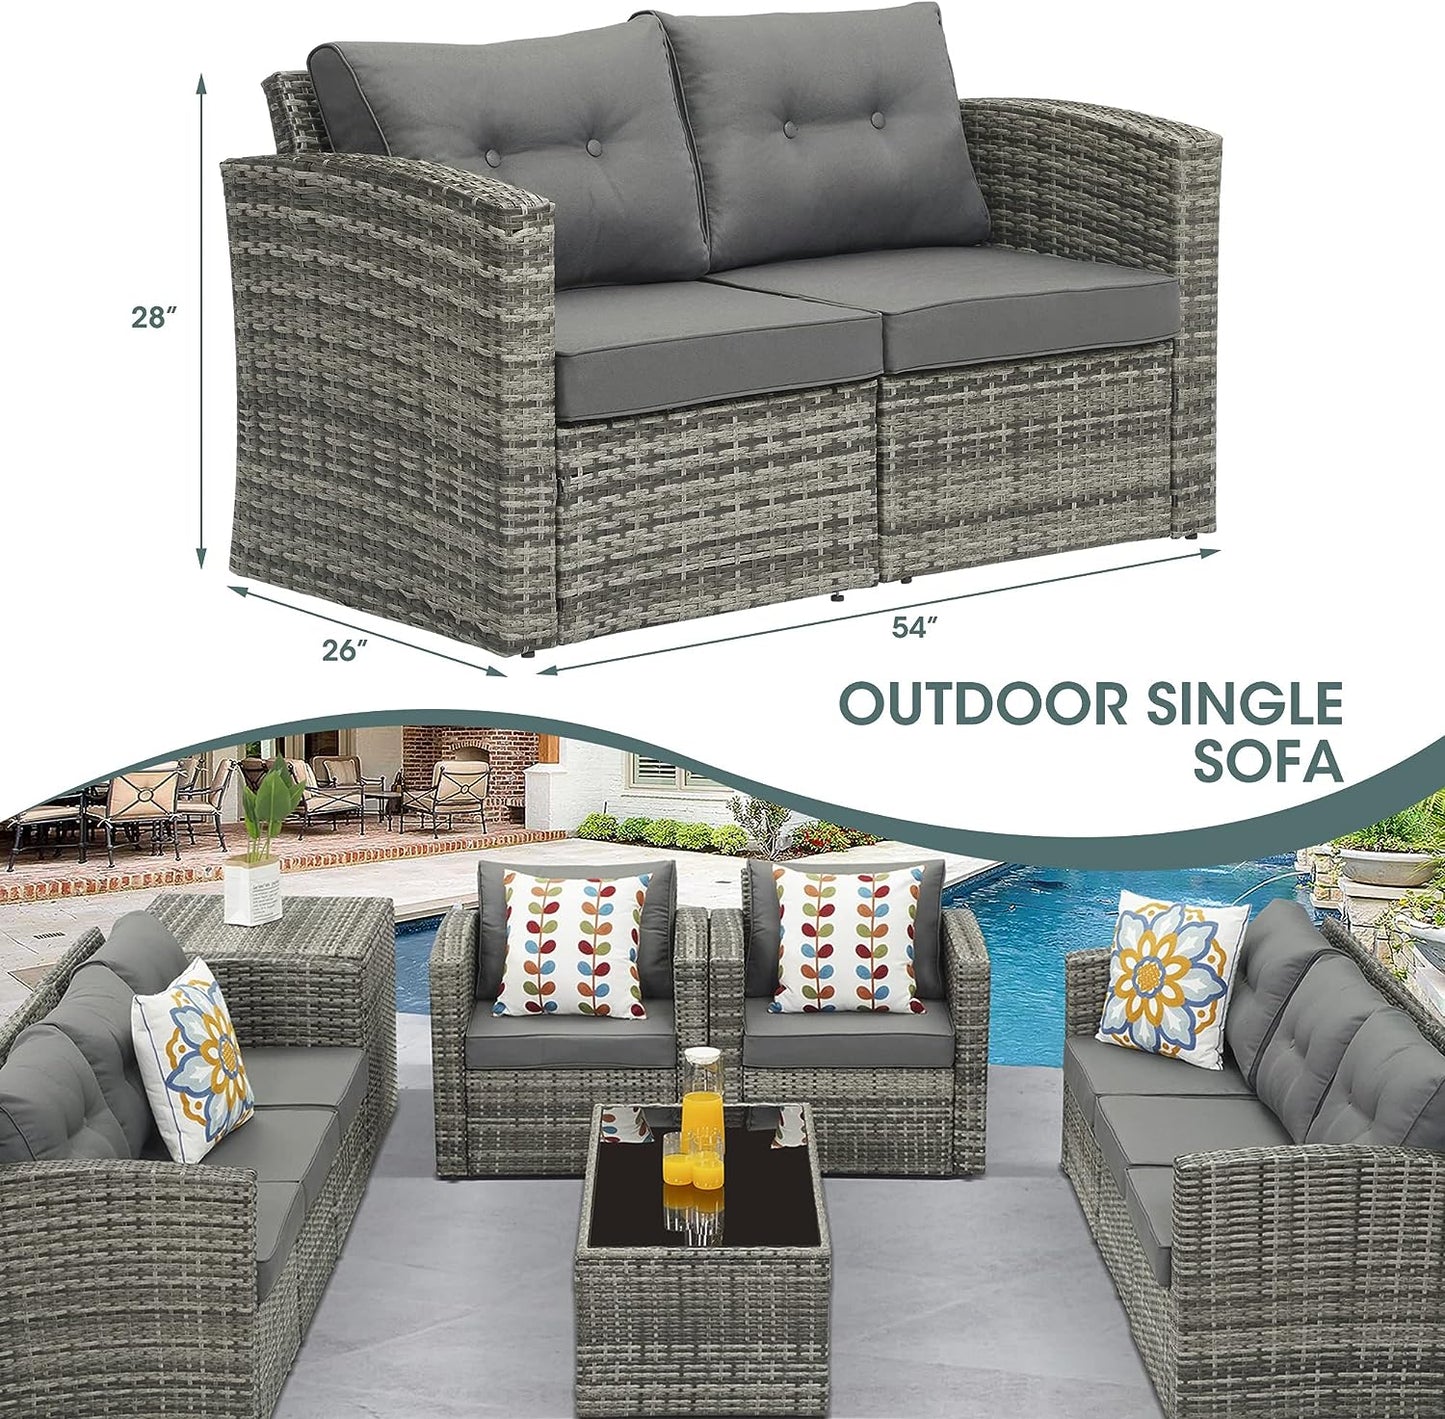 Outdoor Loveseat Patio Furniture Corner Sofa, All-Weather Grey Wicker 2-Piece Rattan Outdoor Sectional Couch Sofa Set with Dark Grey Non-Slip Cushions,Aluminum Frame